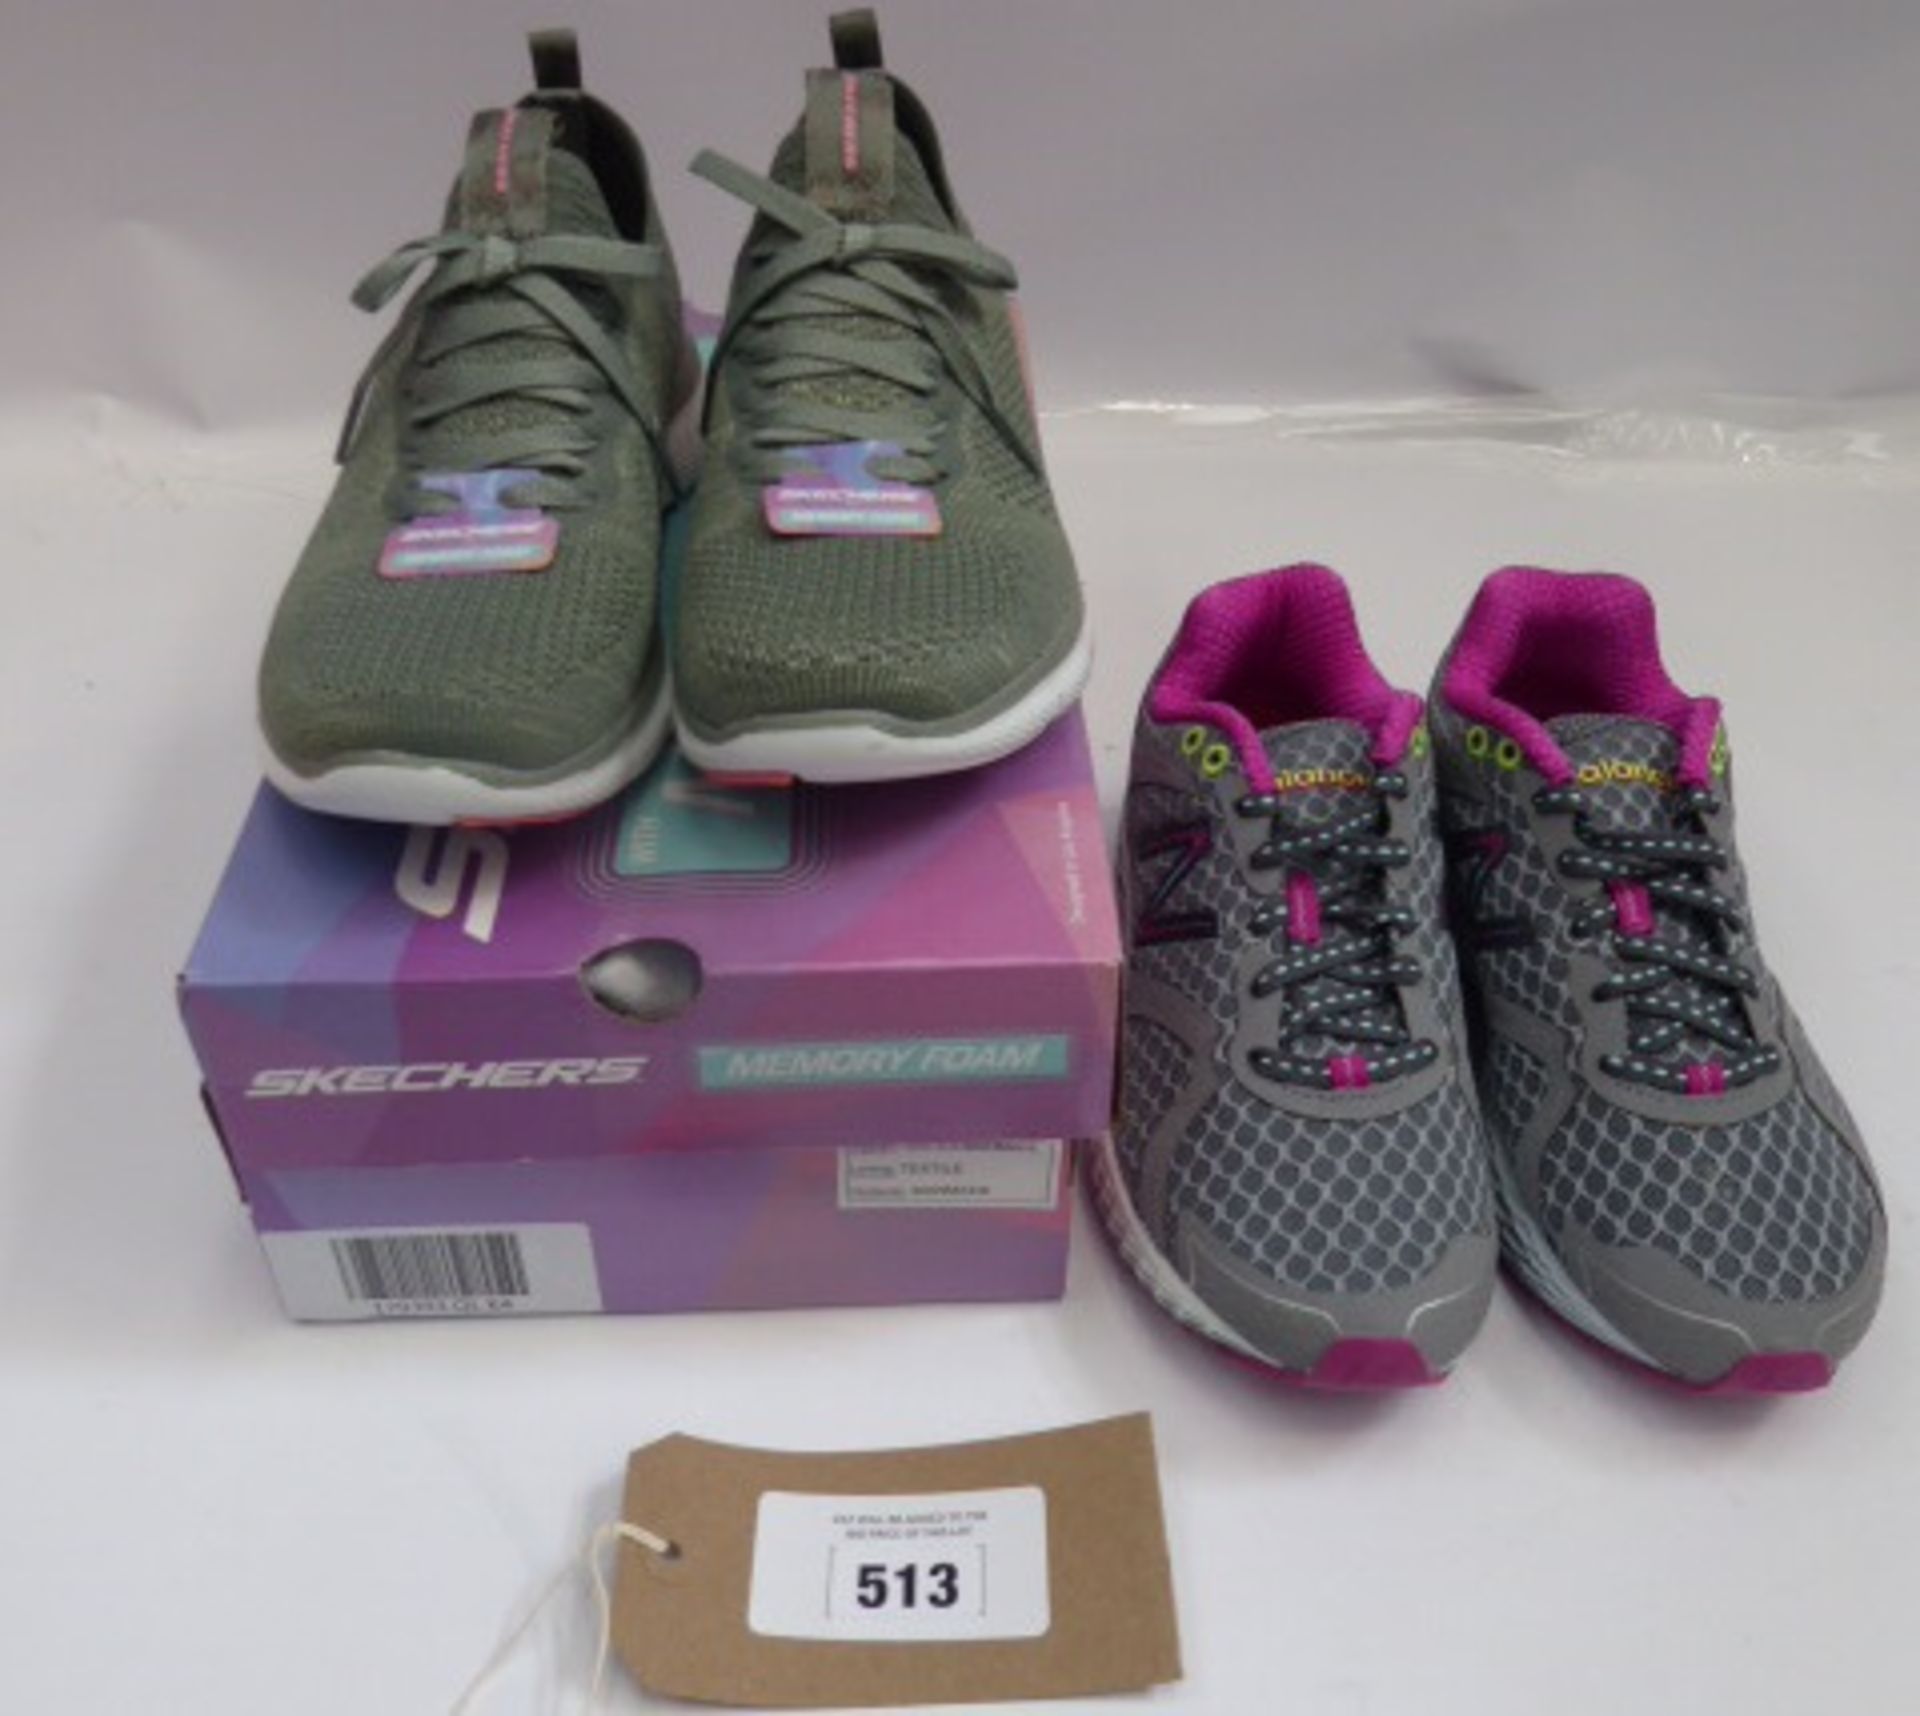 A pair of grey/pink New Balance running trainers UK 4 and a pair of Sketchers memory foam trainers